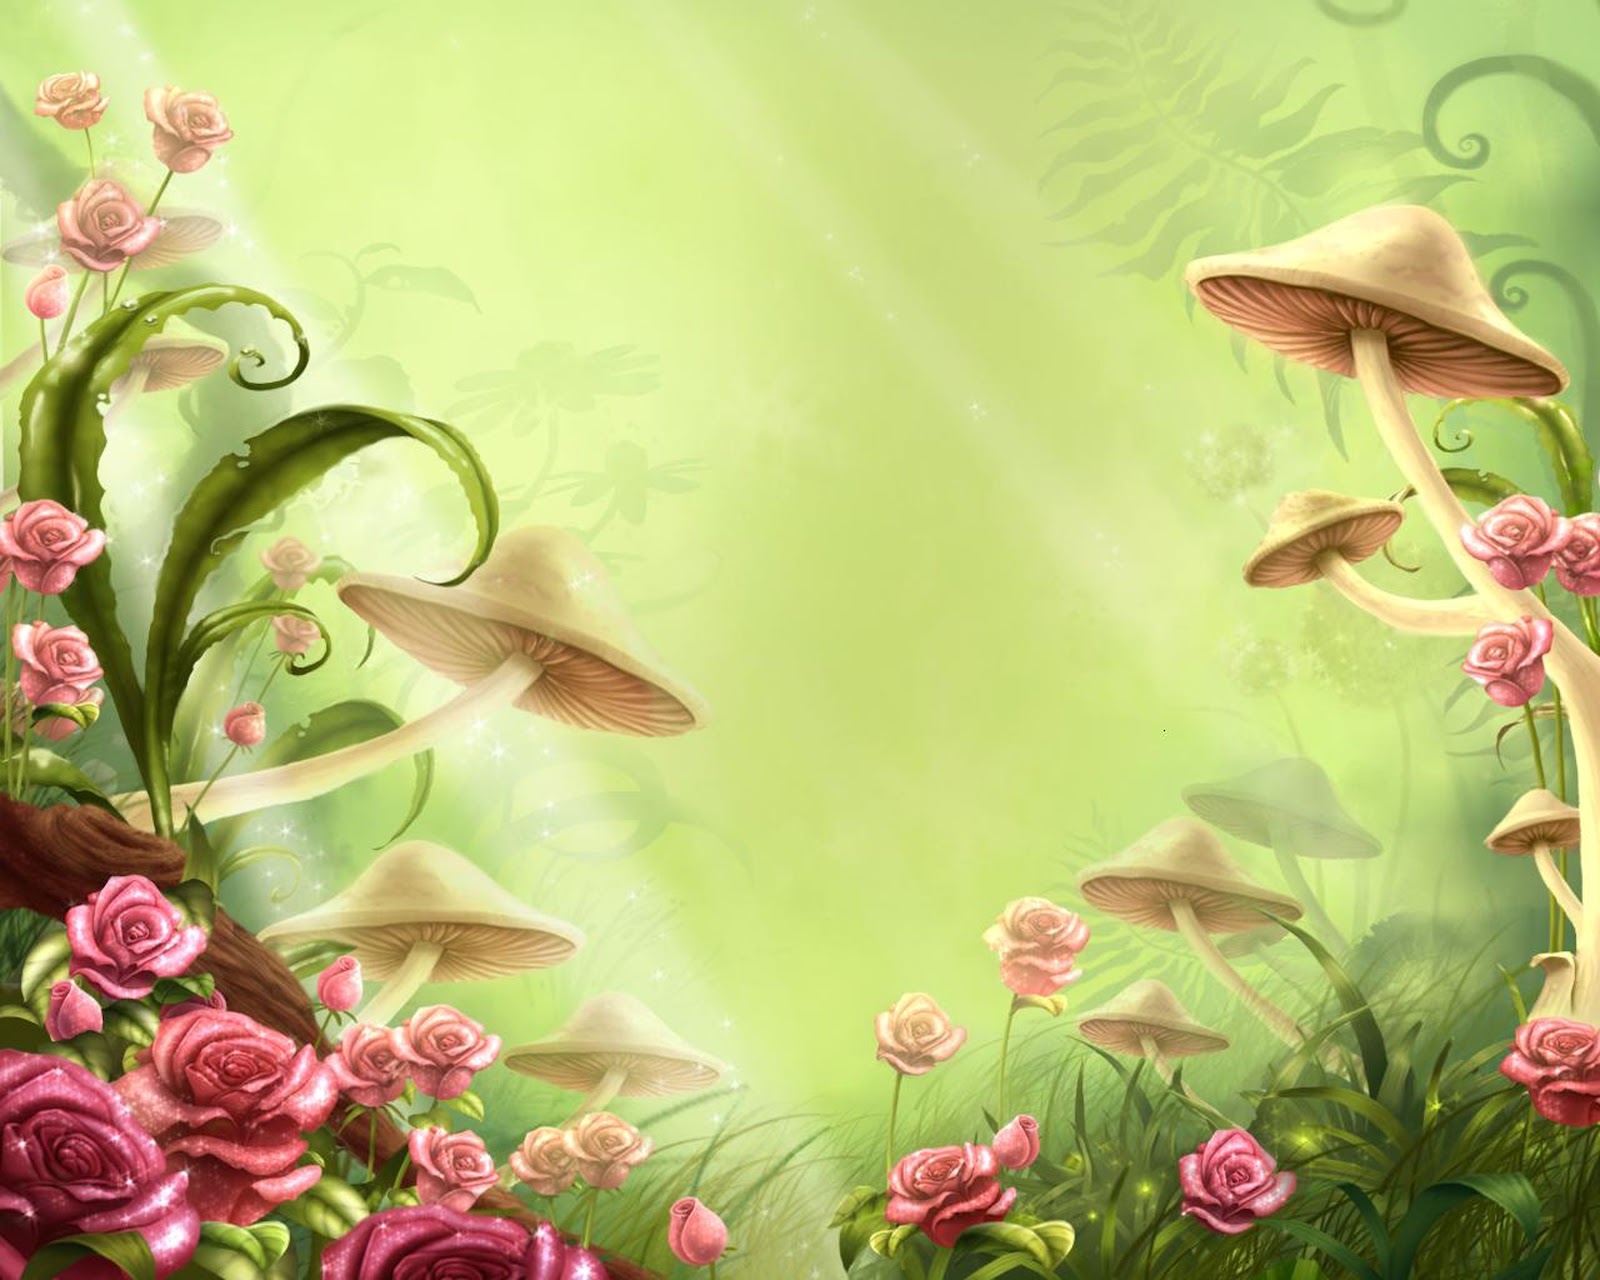 Wallpapers fairy backgrounds Central Photoshop 1600x1280